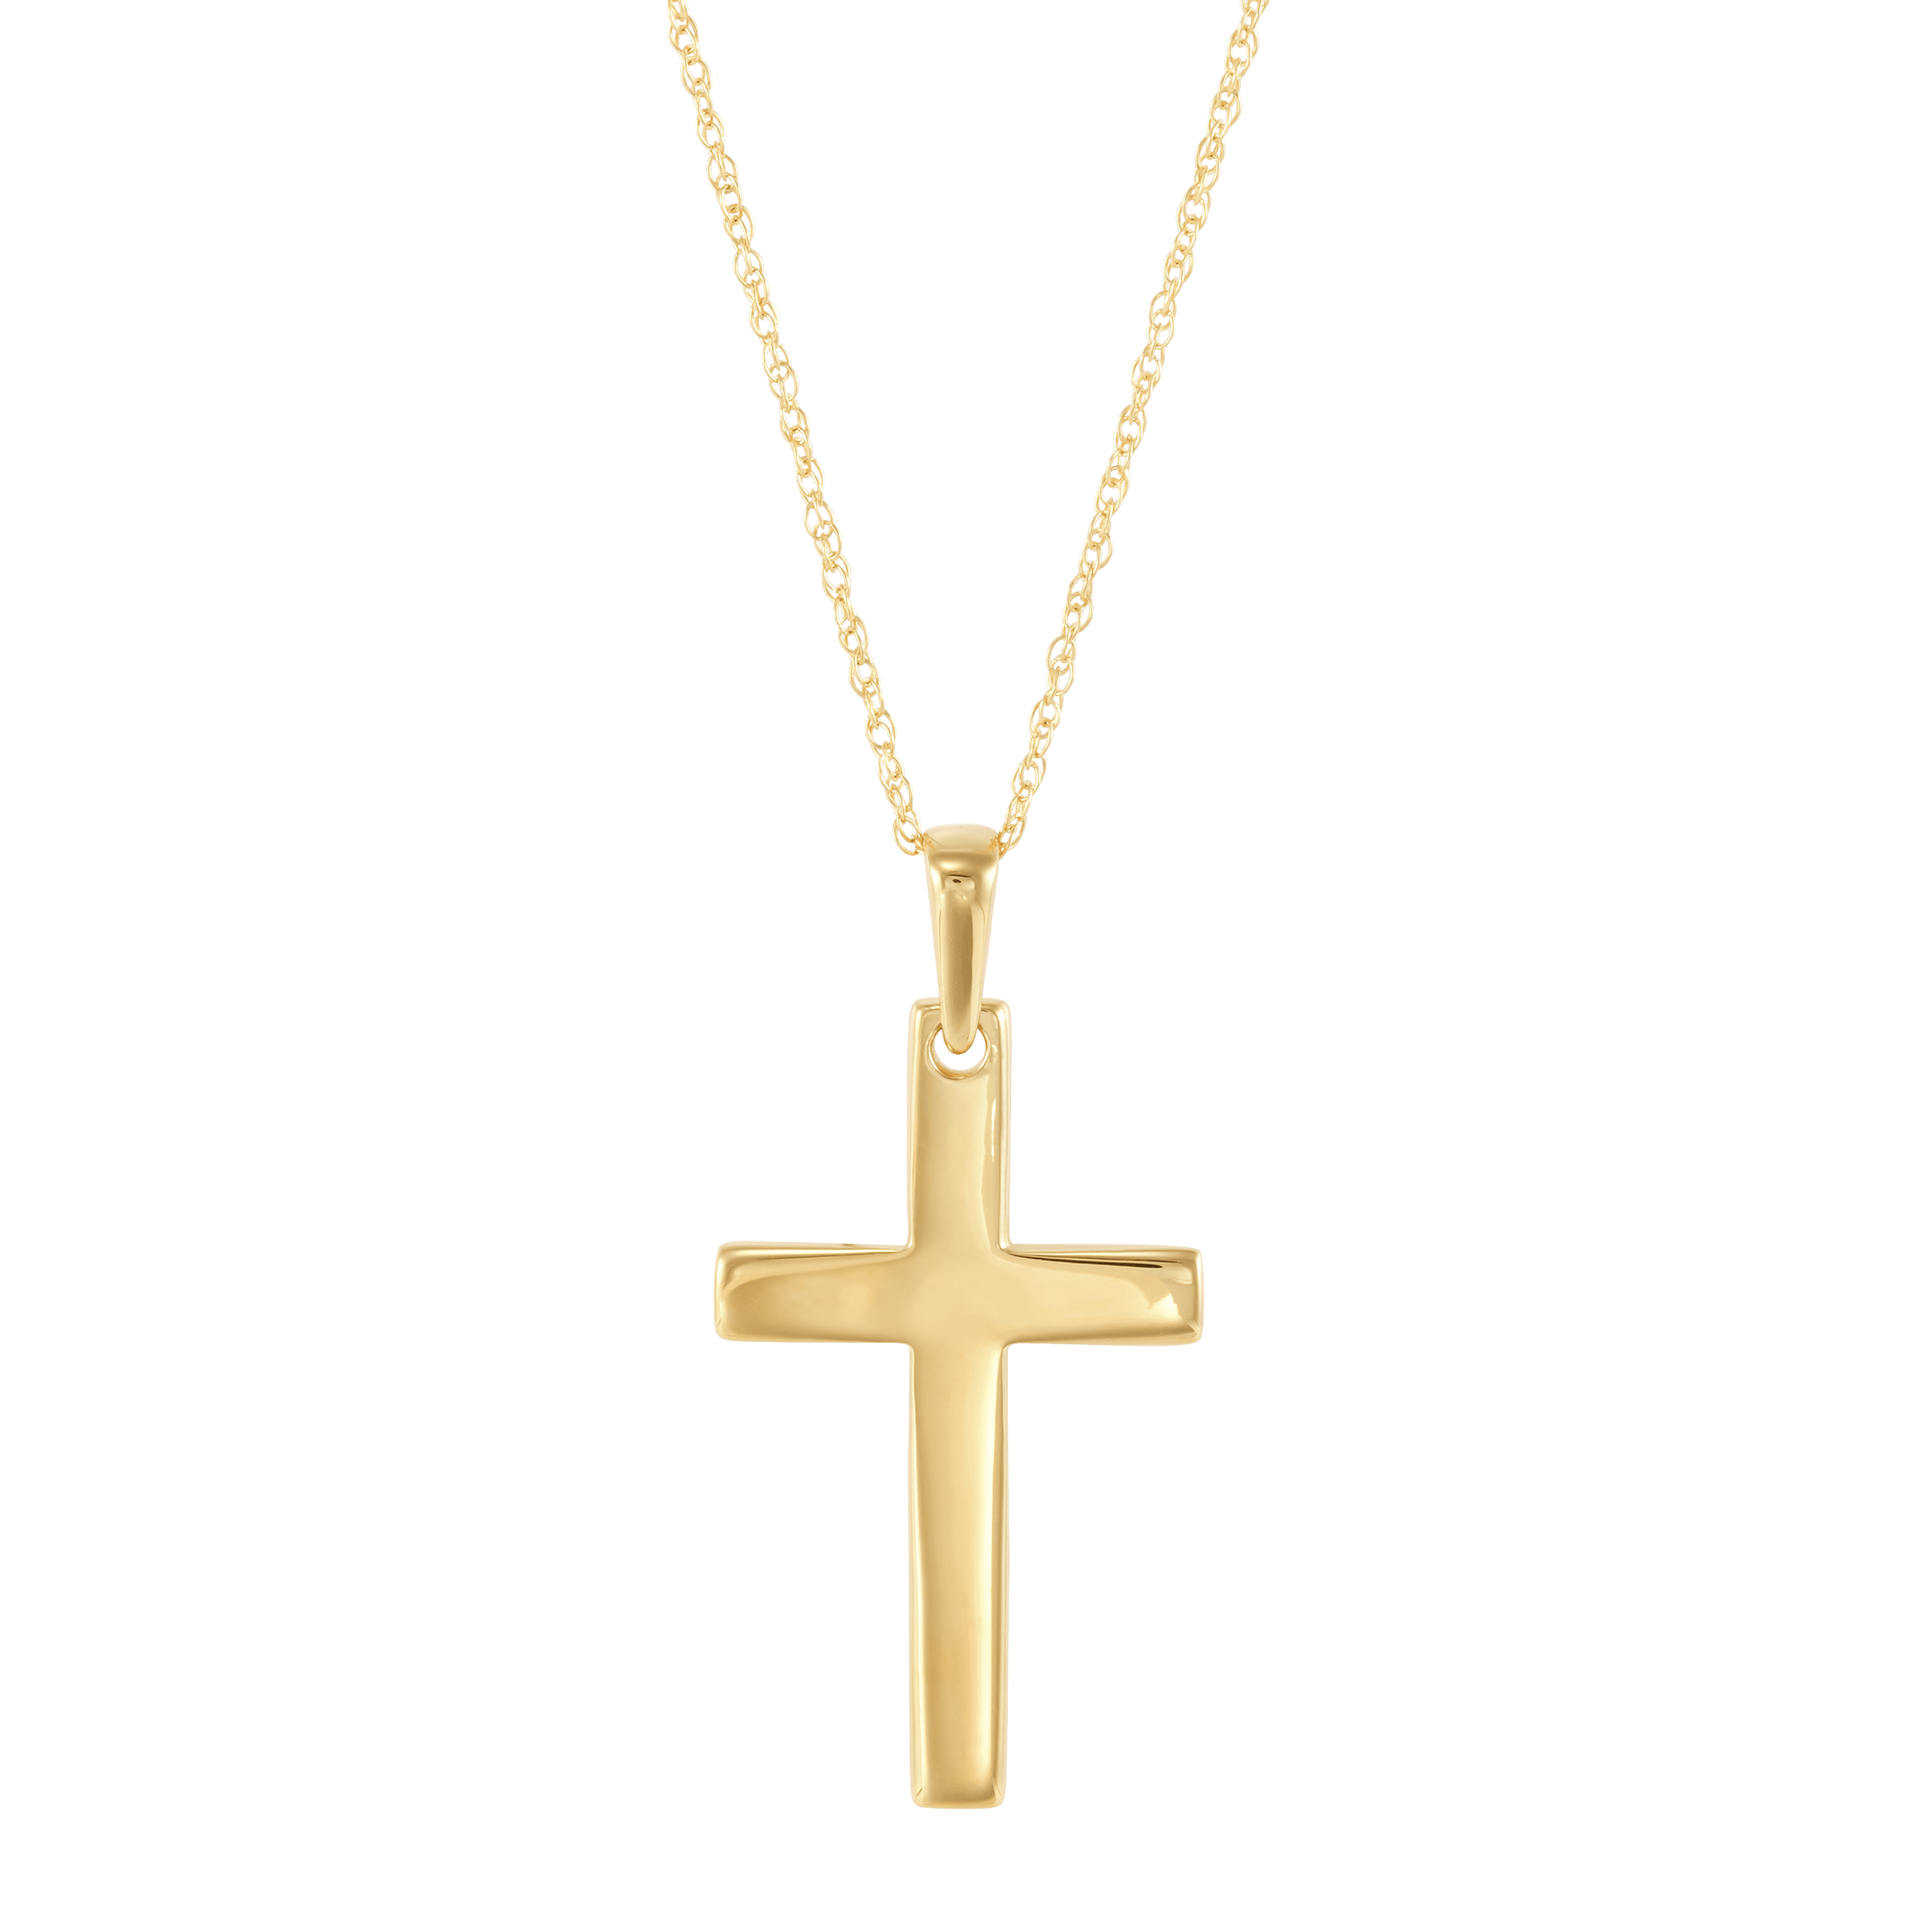 Welry Engravable Cross Pendant Necklace in 10K Yellow Gold, 18